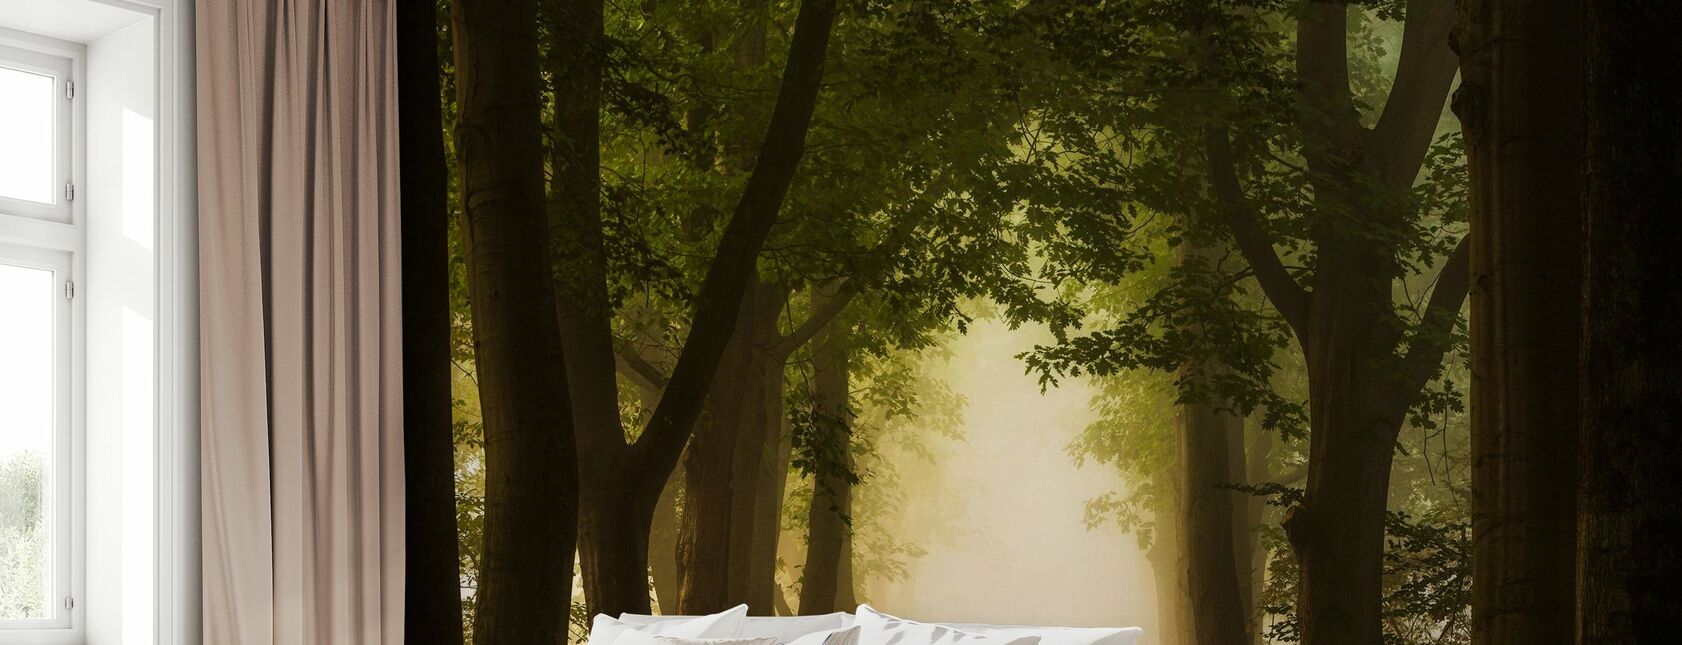 Path Through Forest - Wallpaper - Bedroom